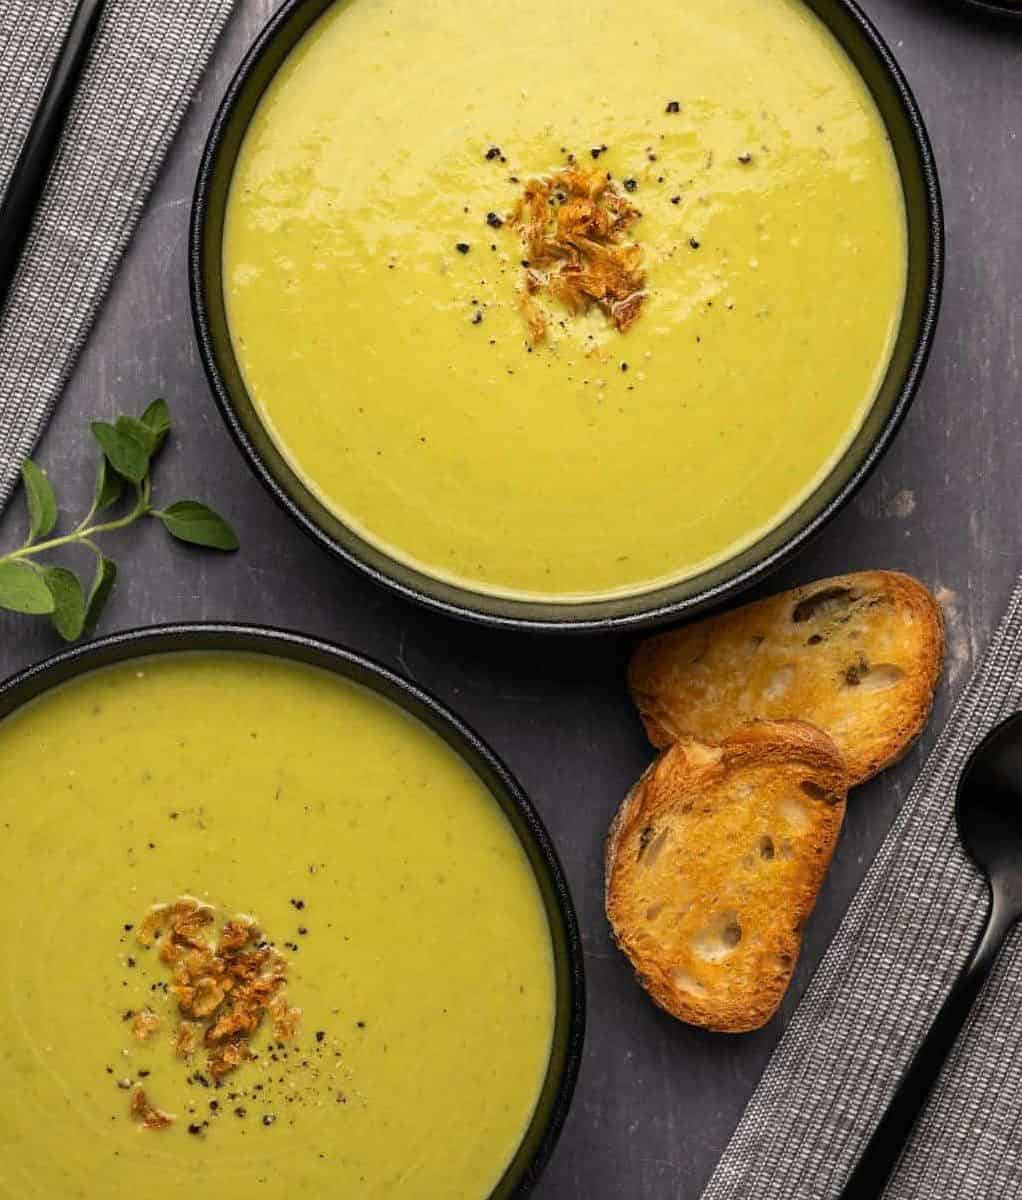  This soup is hearty and filling enough for a meal, or serve it as a starter to impress your guests.